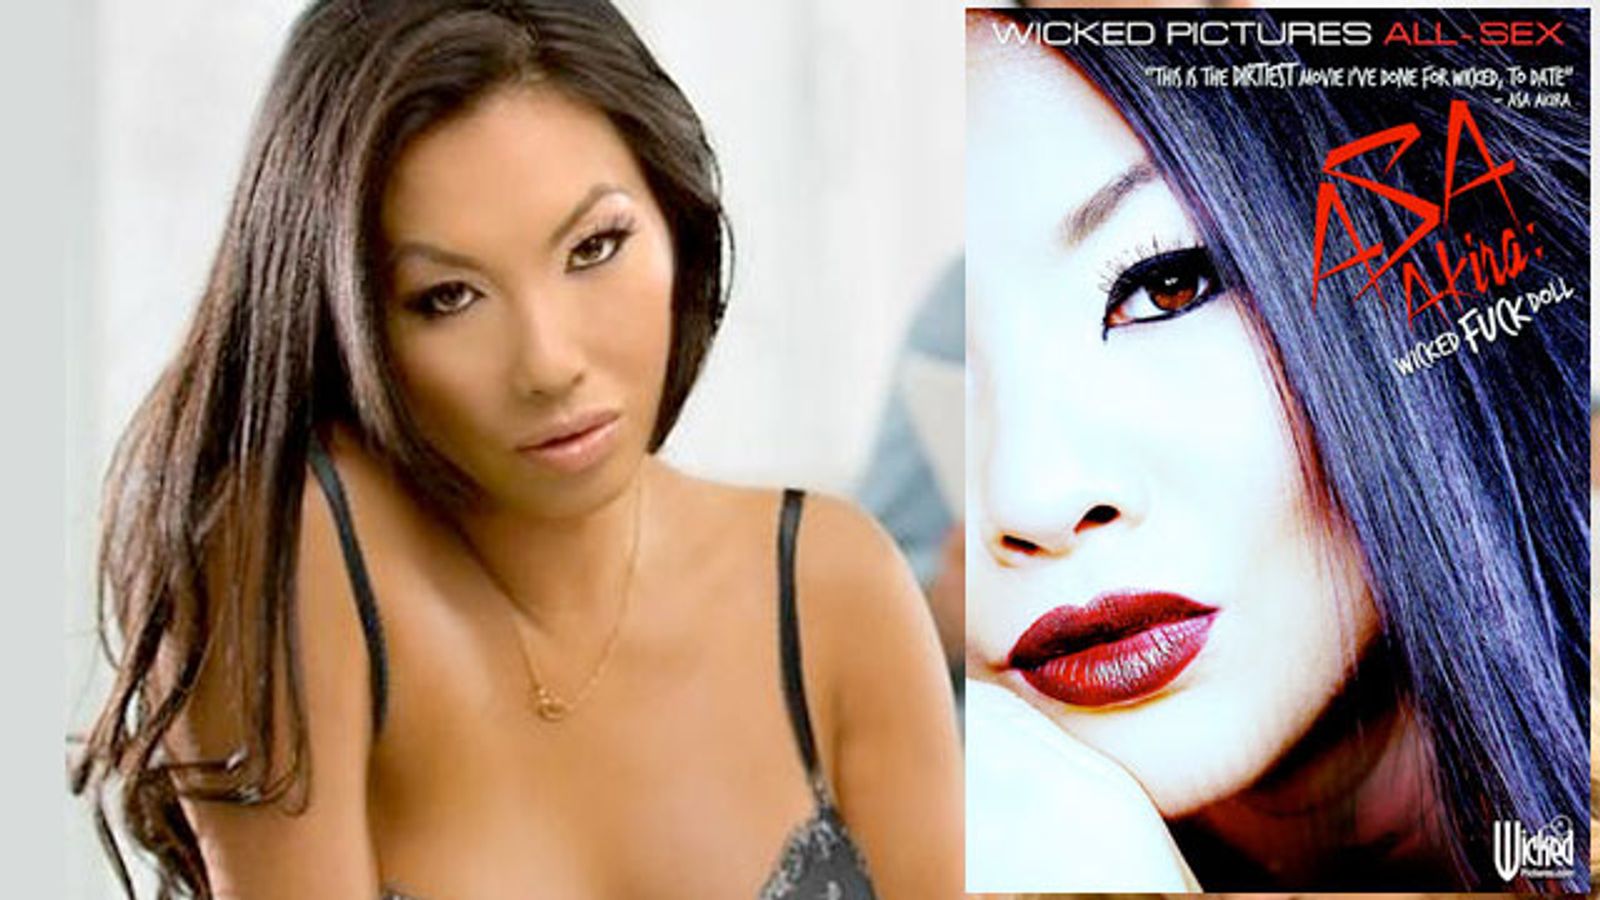 Wicked's Asa Akira to Host Reddit Q&A on Wednesday Evening